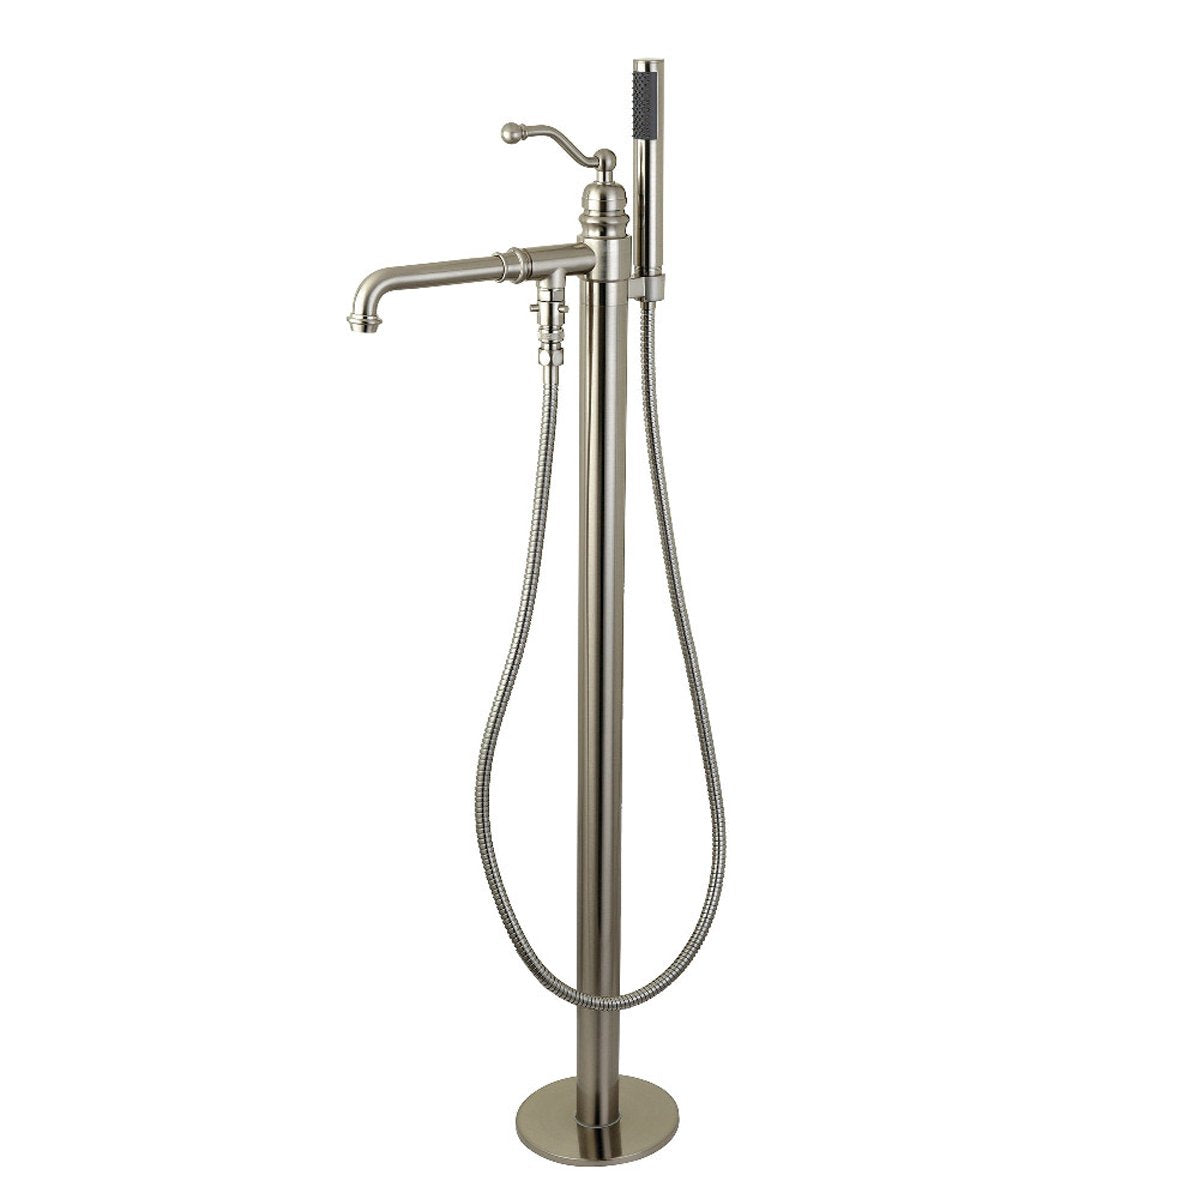 Kingston Brass English Country Single Handle Freestanding Roman Tub Filler with Hand Shower